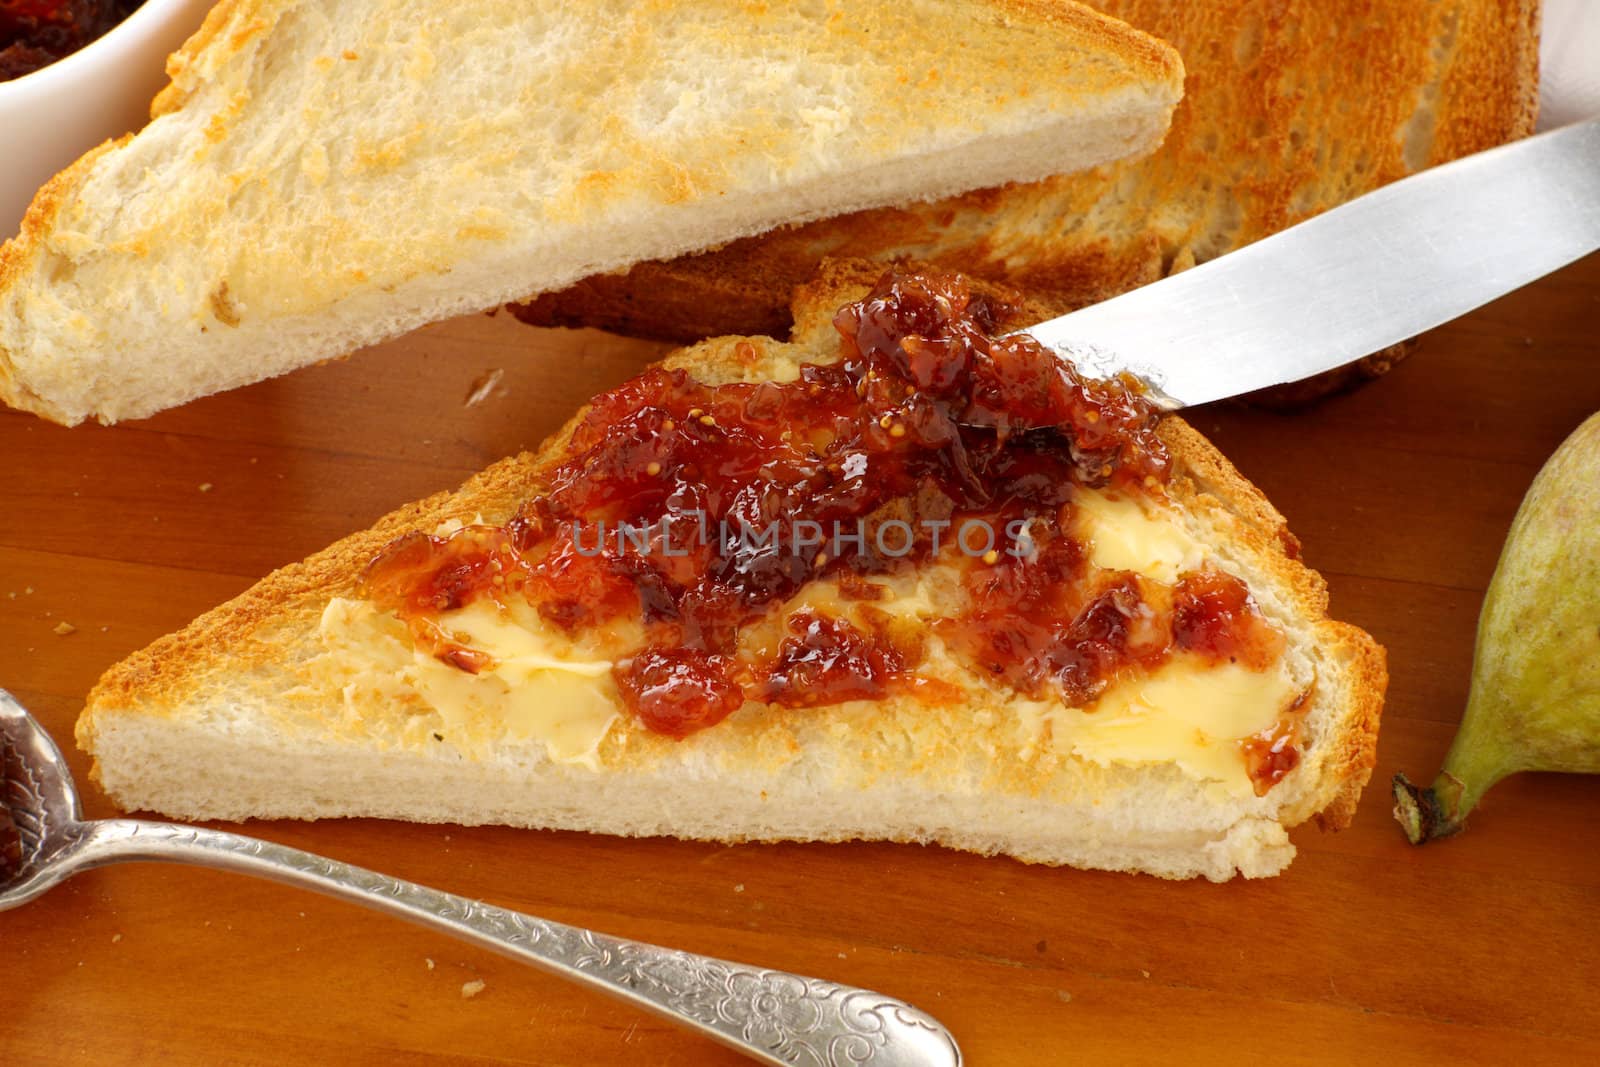 Delicious homemade fig jam spread on a slice of toast.